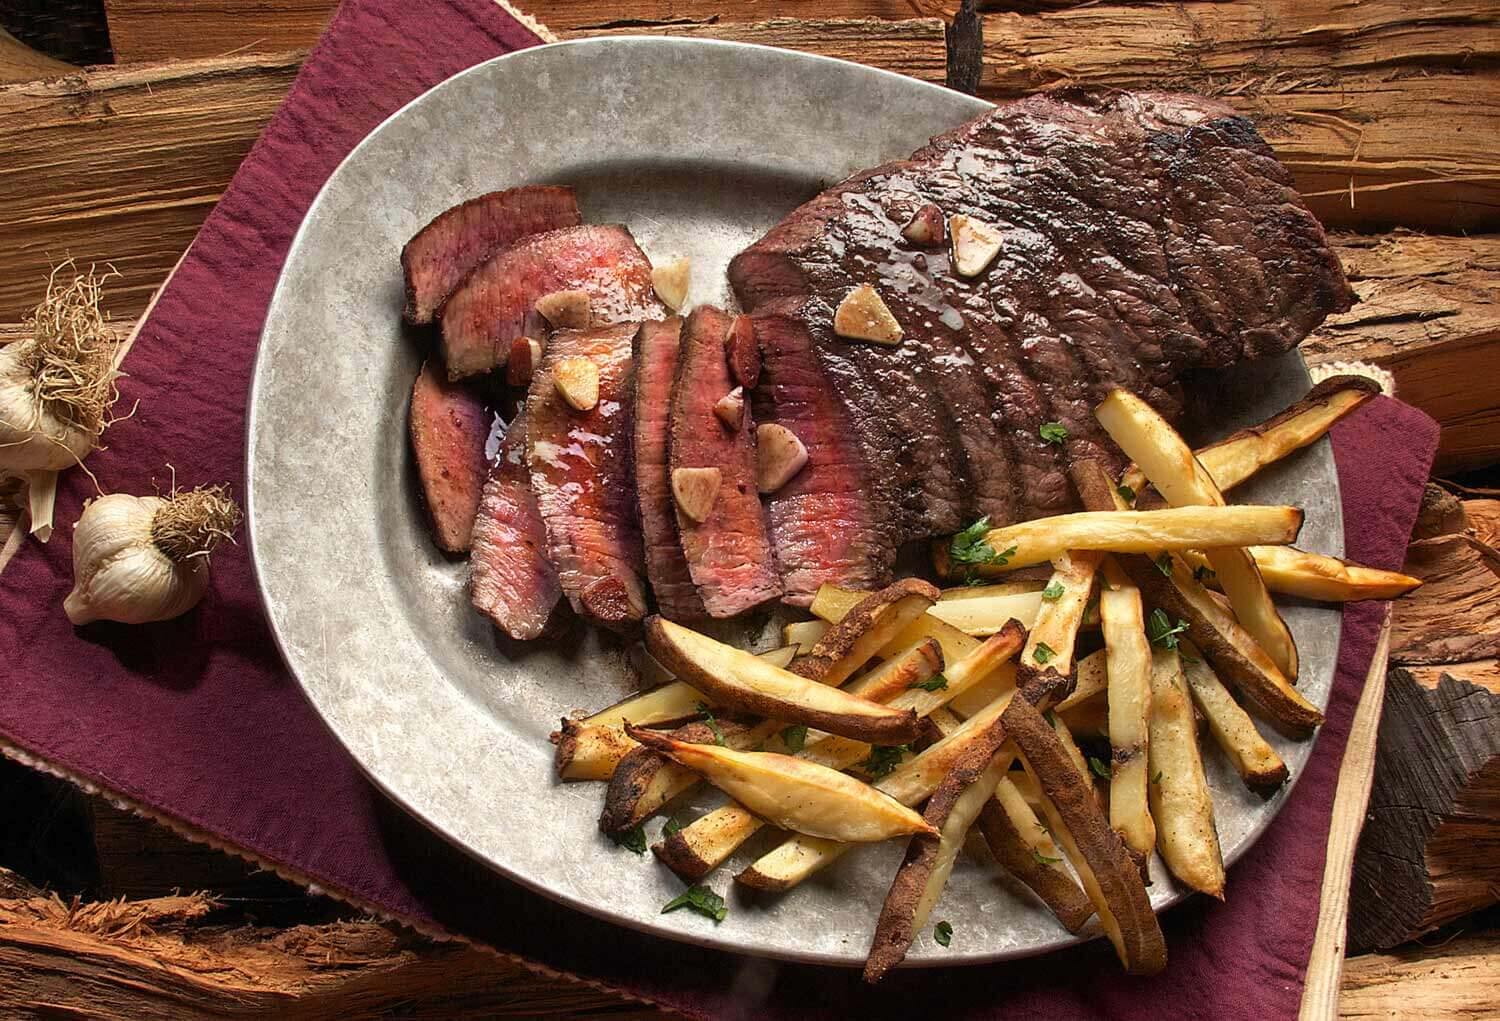 Steak with French fries